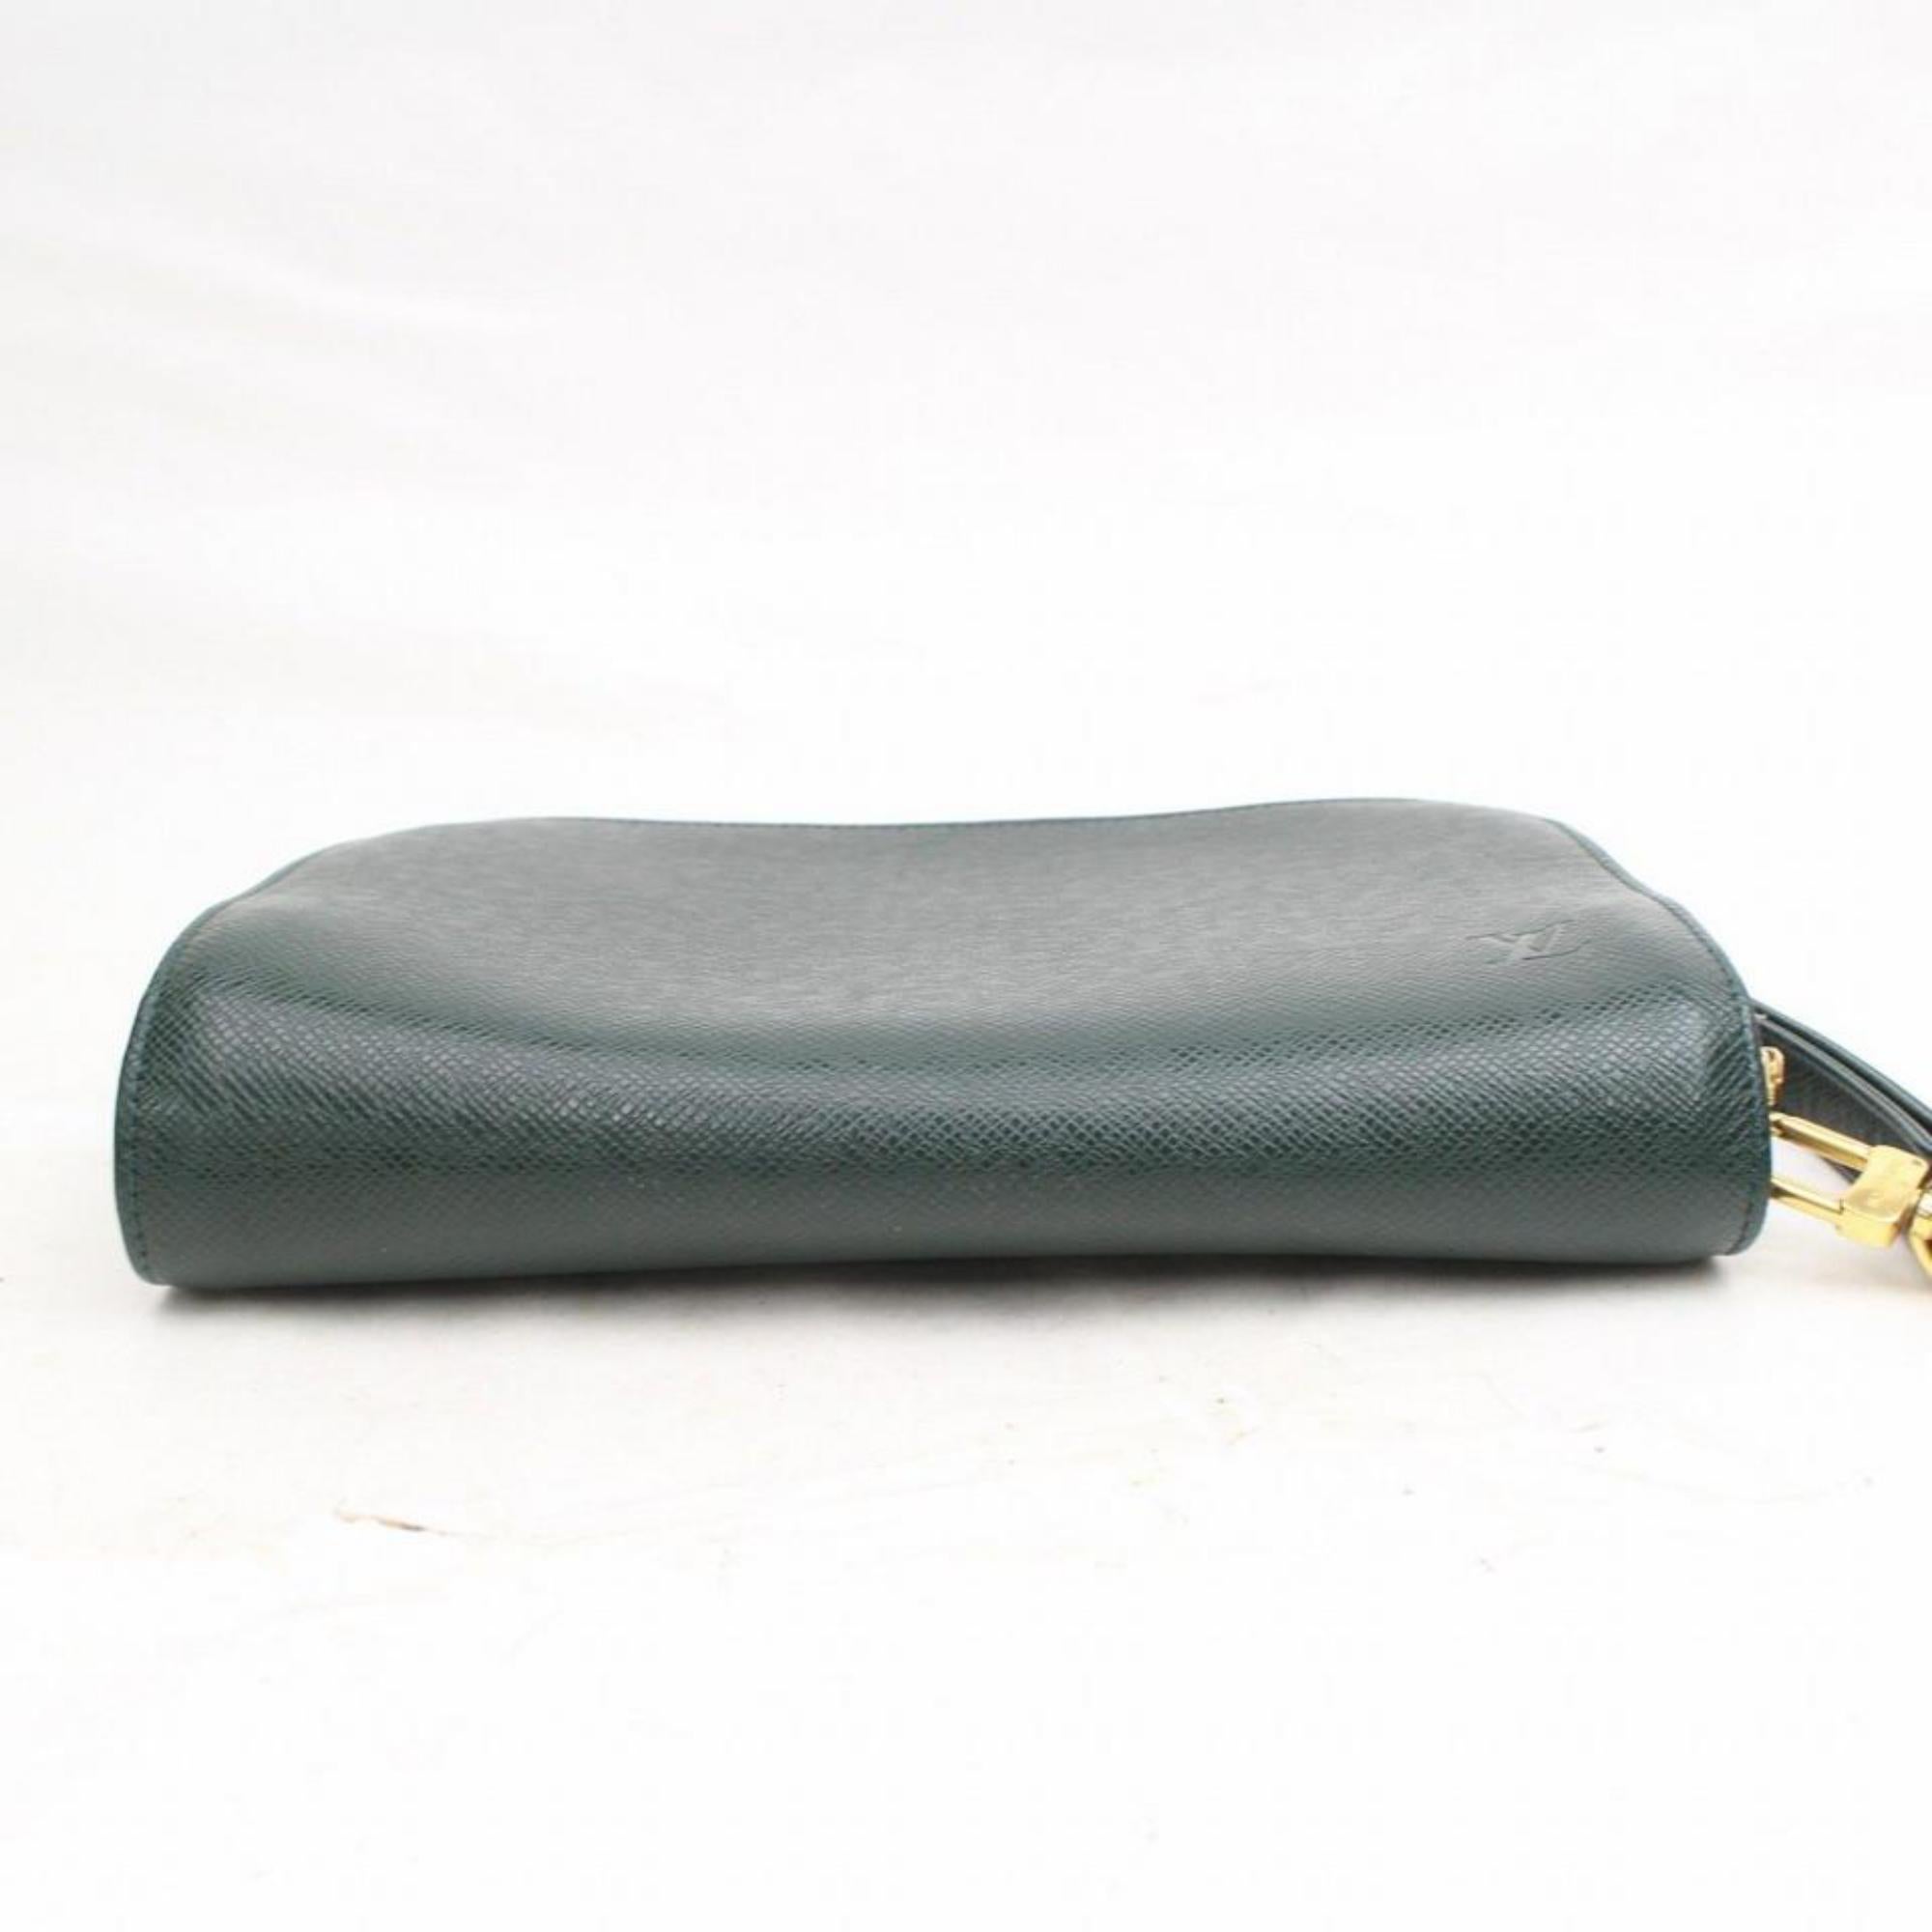 Louis Vuitton Green Orsay Epicea Taiga Leather Wristlet 868595 Cosmetic Bag For Sale 7